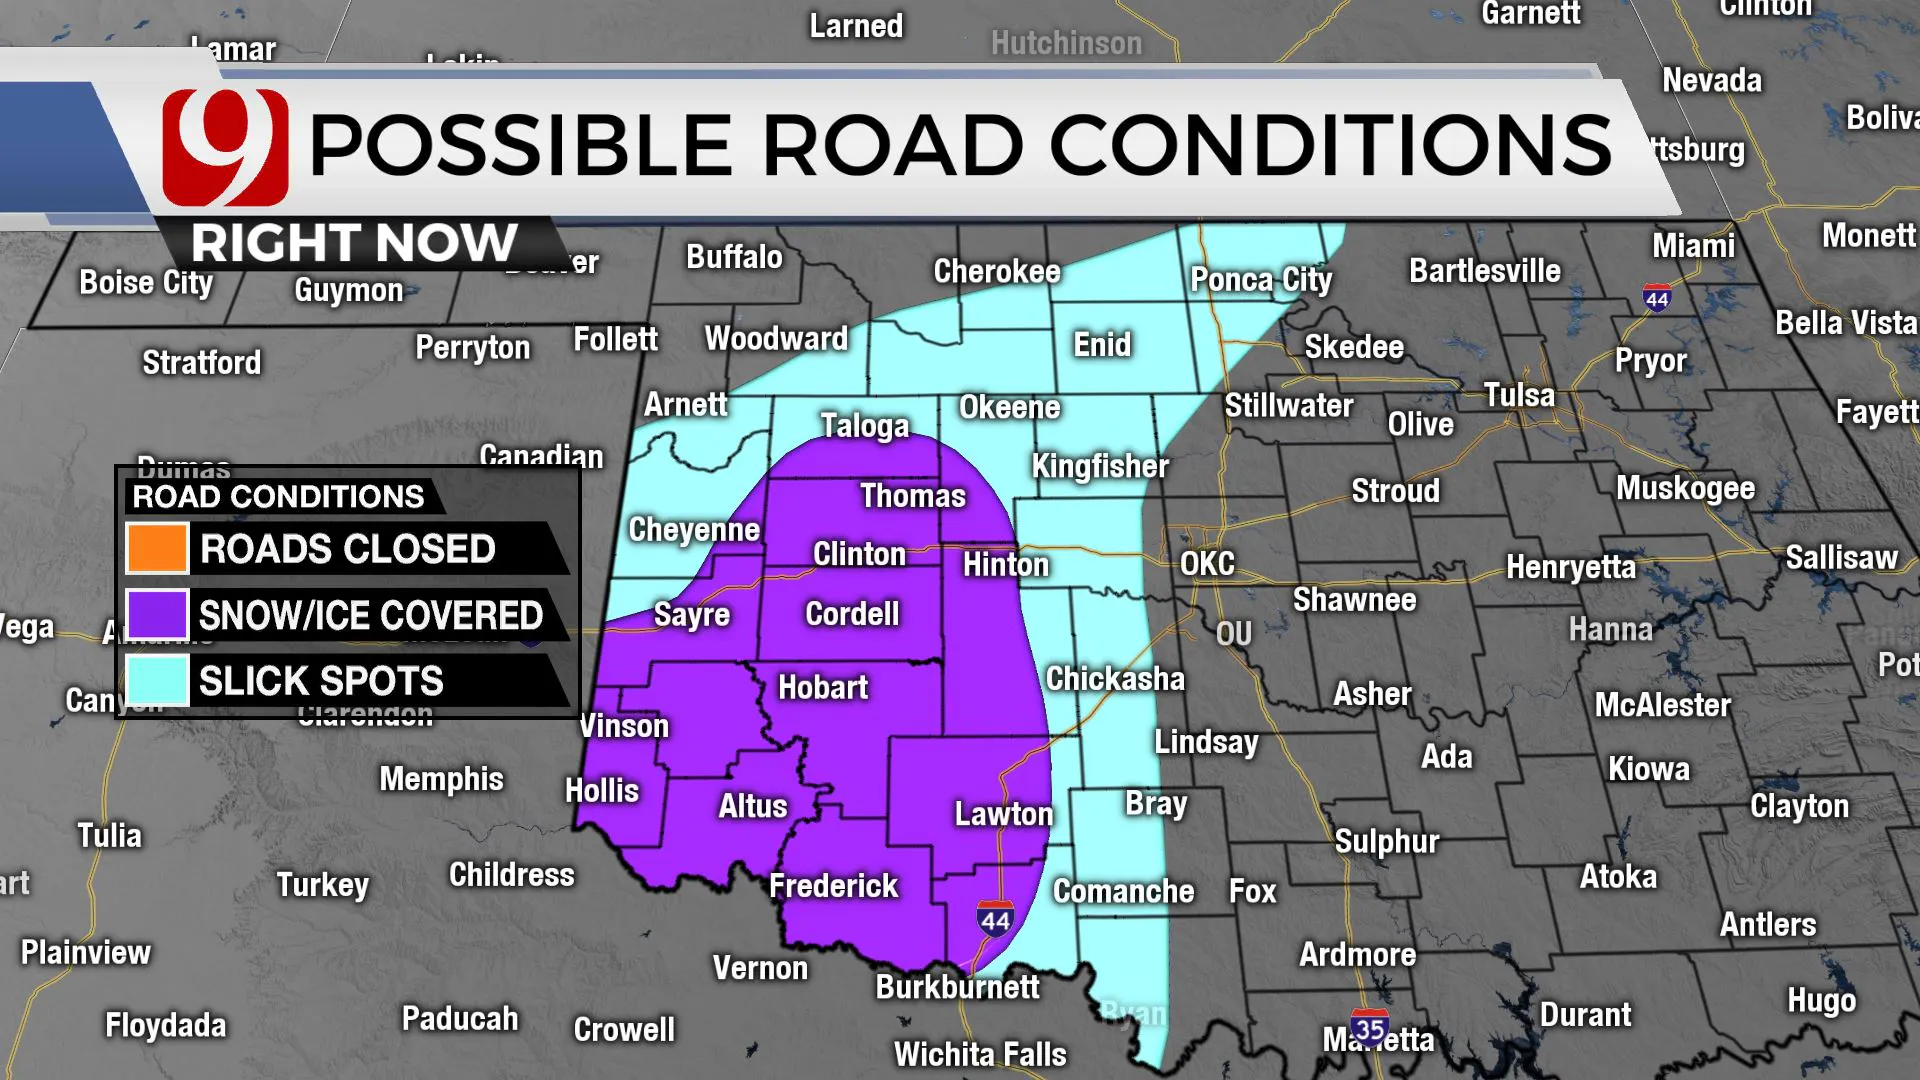 POSSIBLE ROAD CONDITIONS